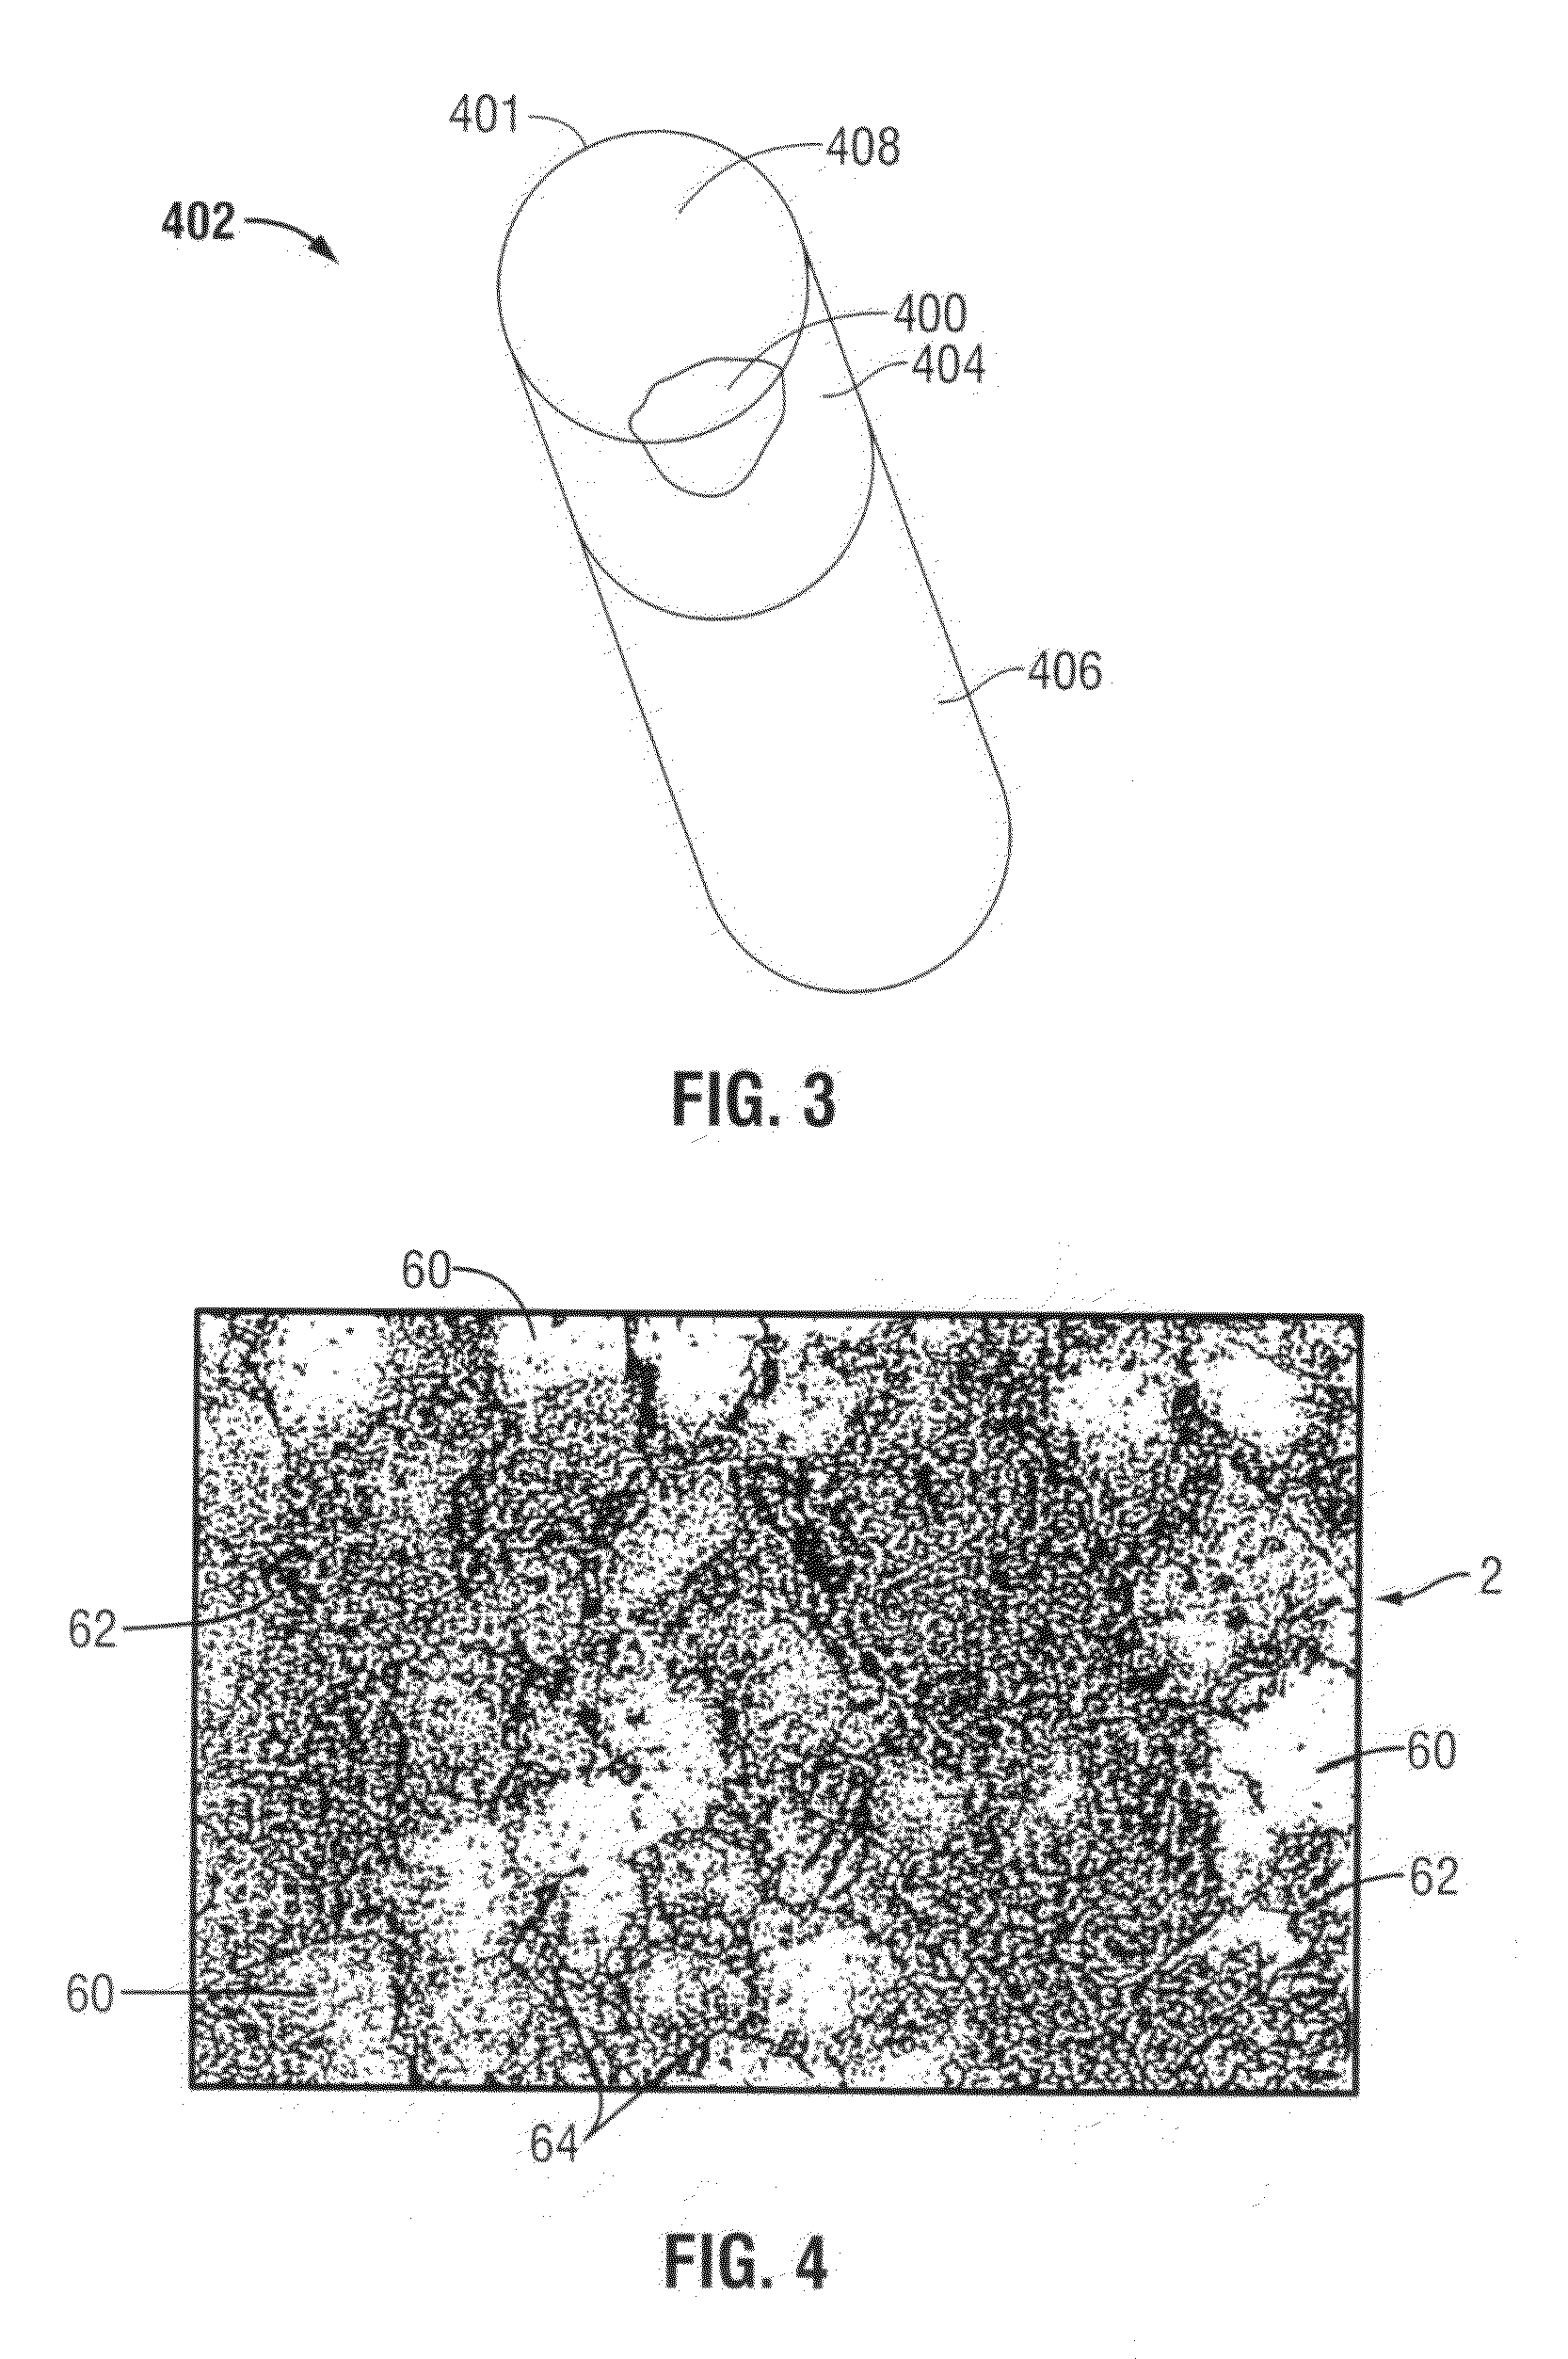 Method and apparatus for selectively leaching portions of PDC cutters used in drill bits